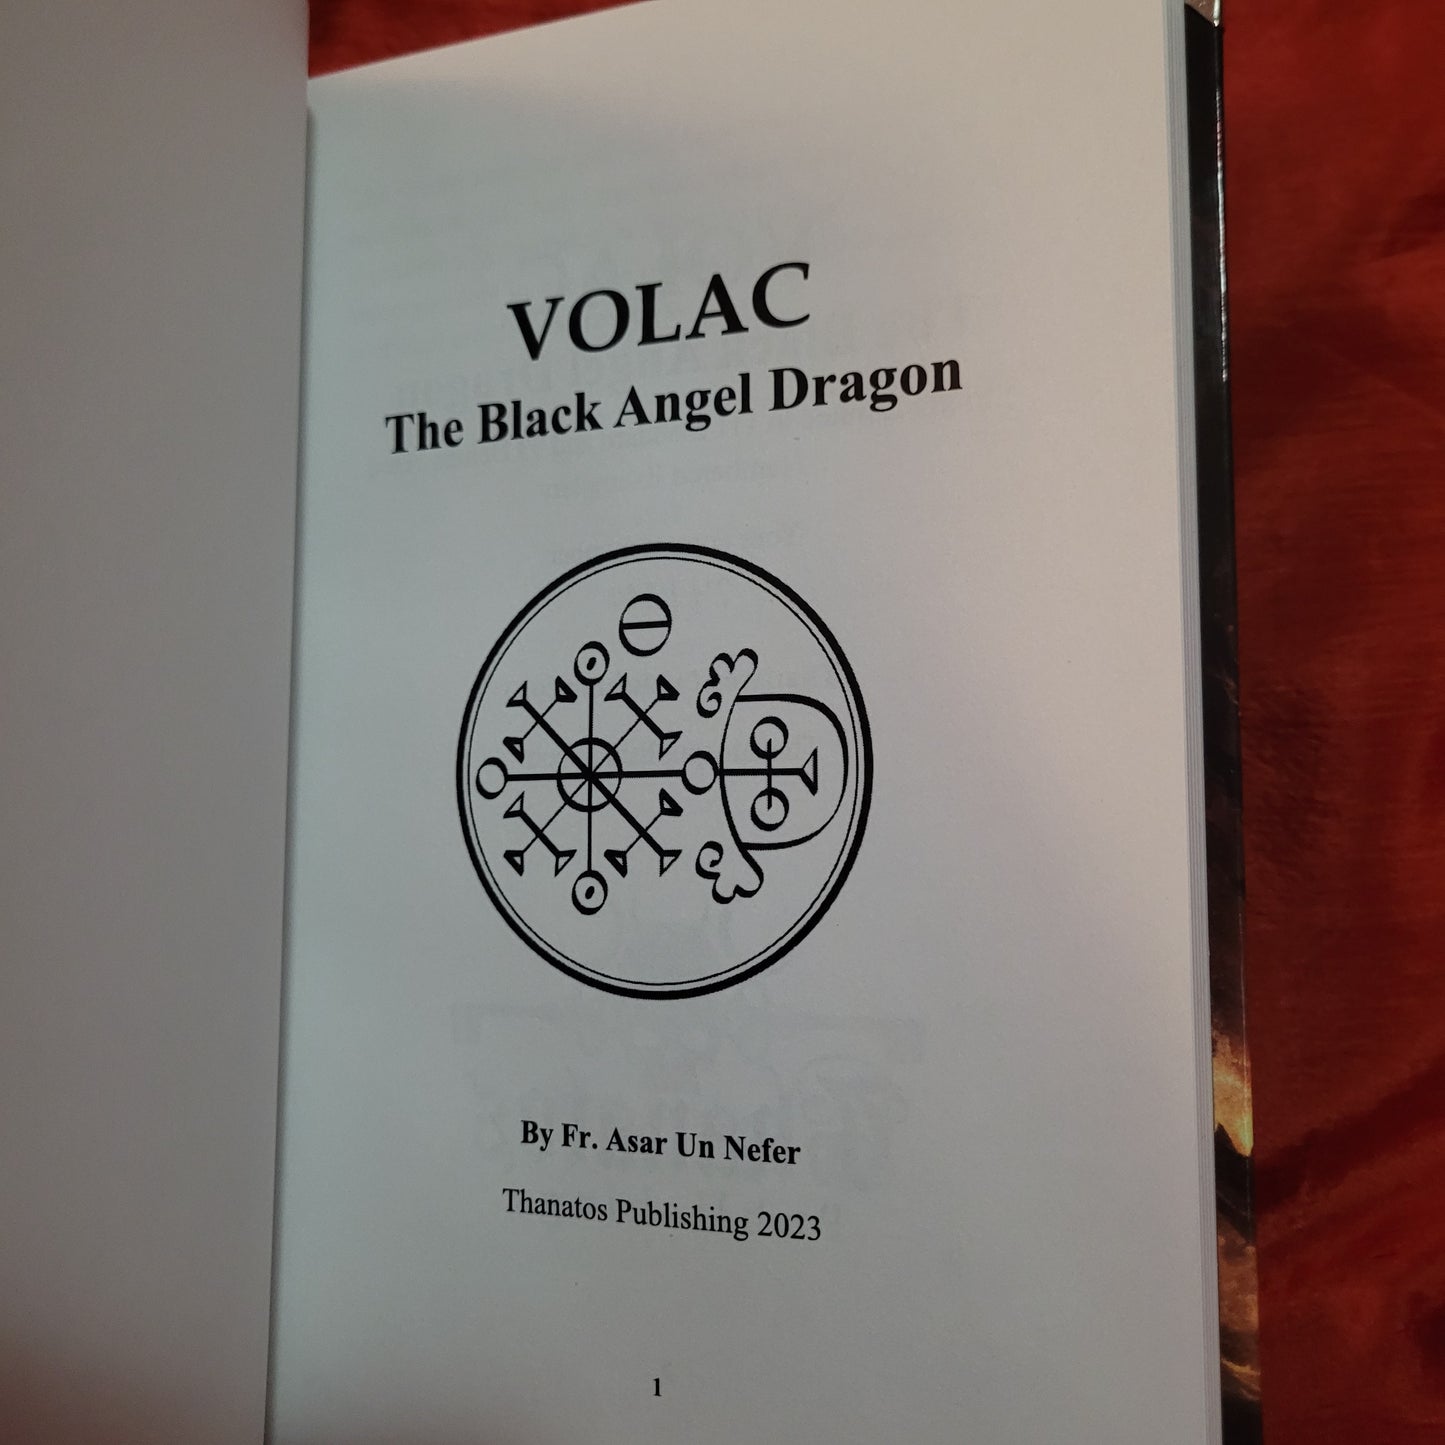 Volac: The Black Angel Dragon by Fr. Asar Un Nefer (Sirius Limited Esoterica/Thanatos Publishing, 2023) Standard Harcover Edition